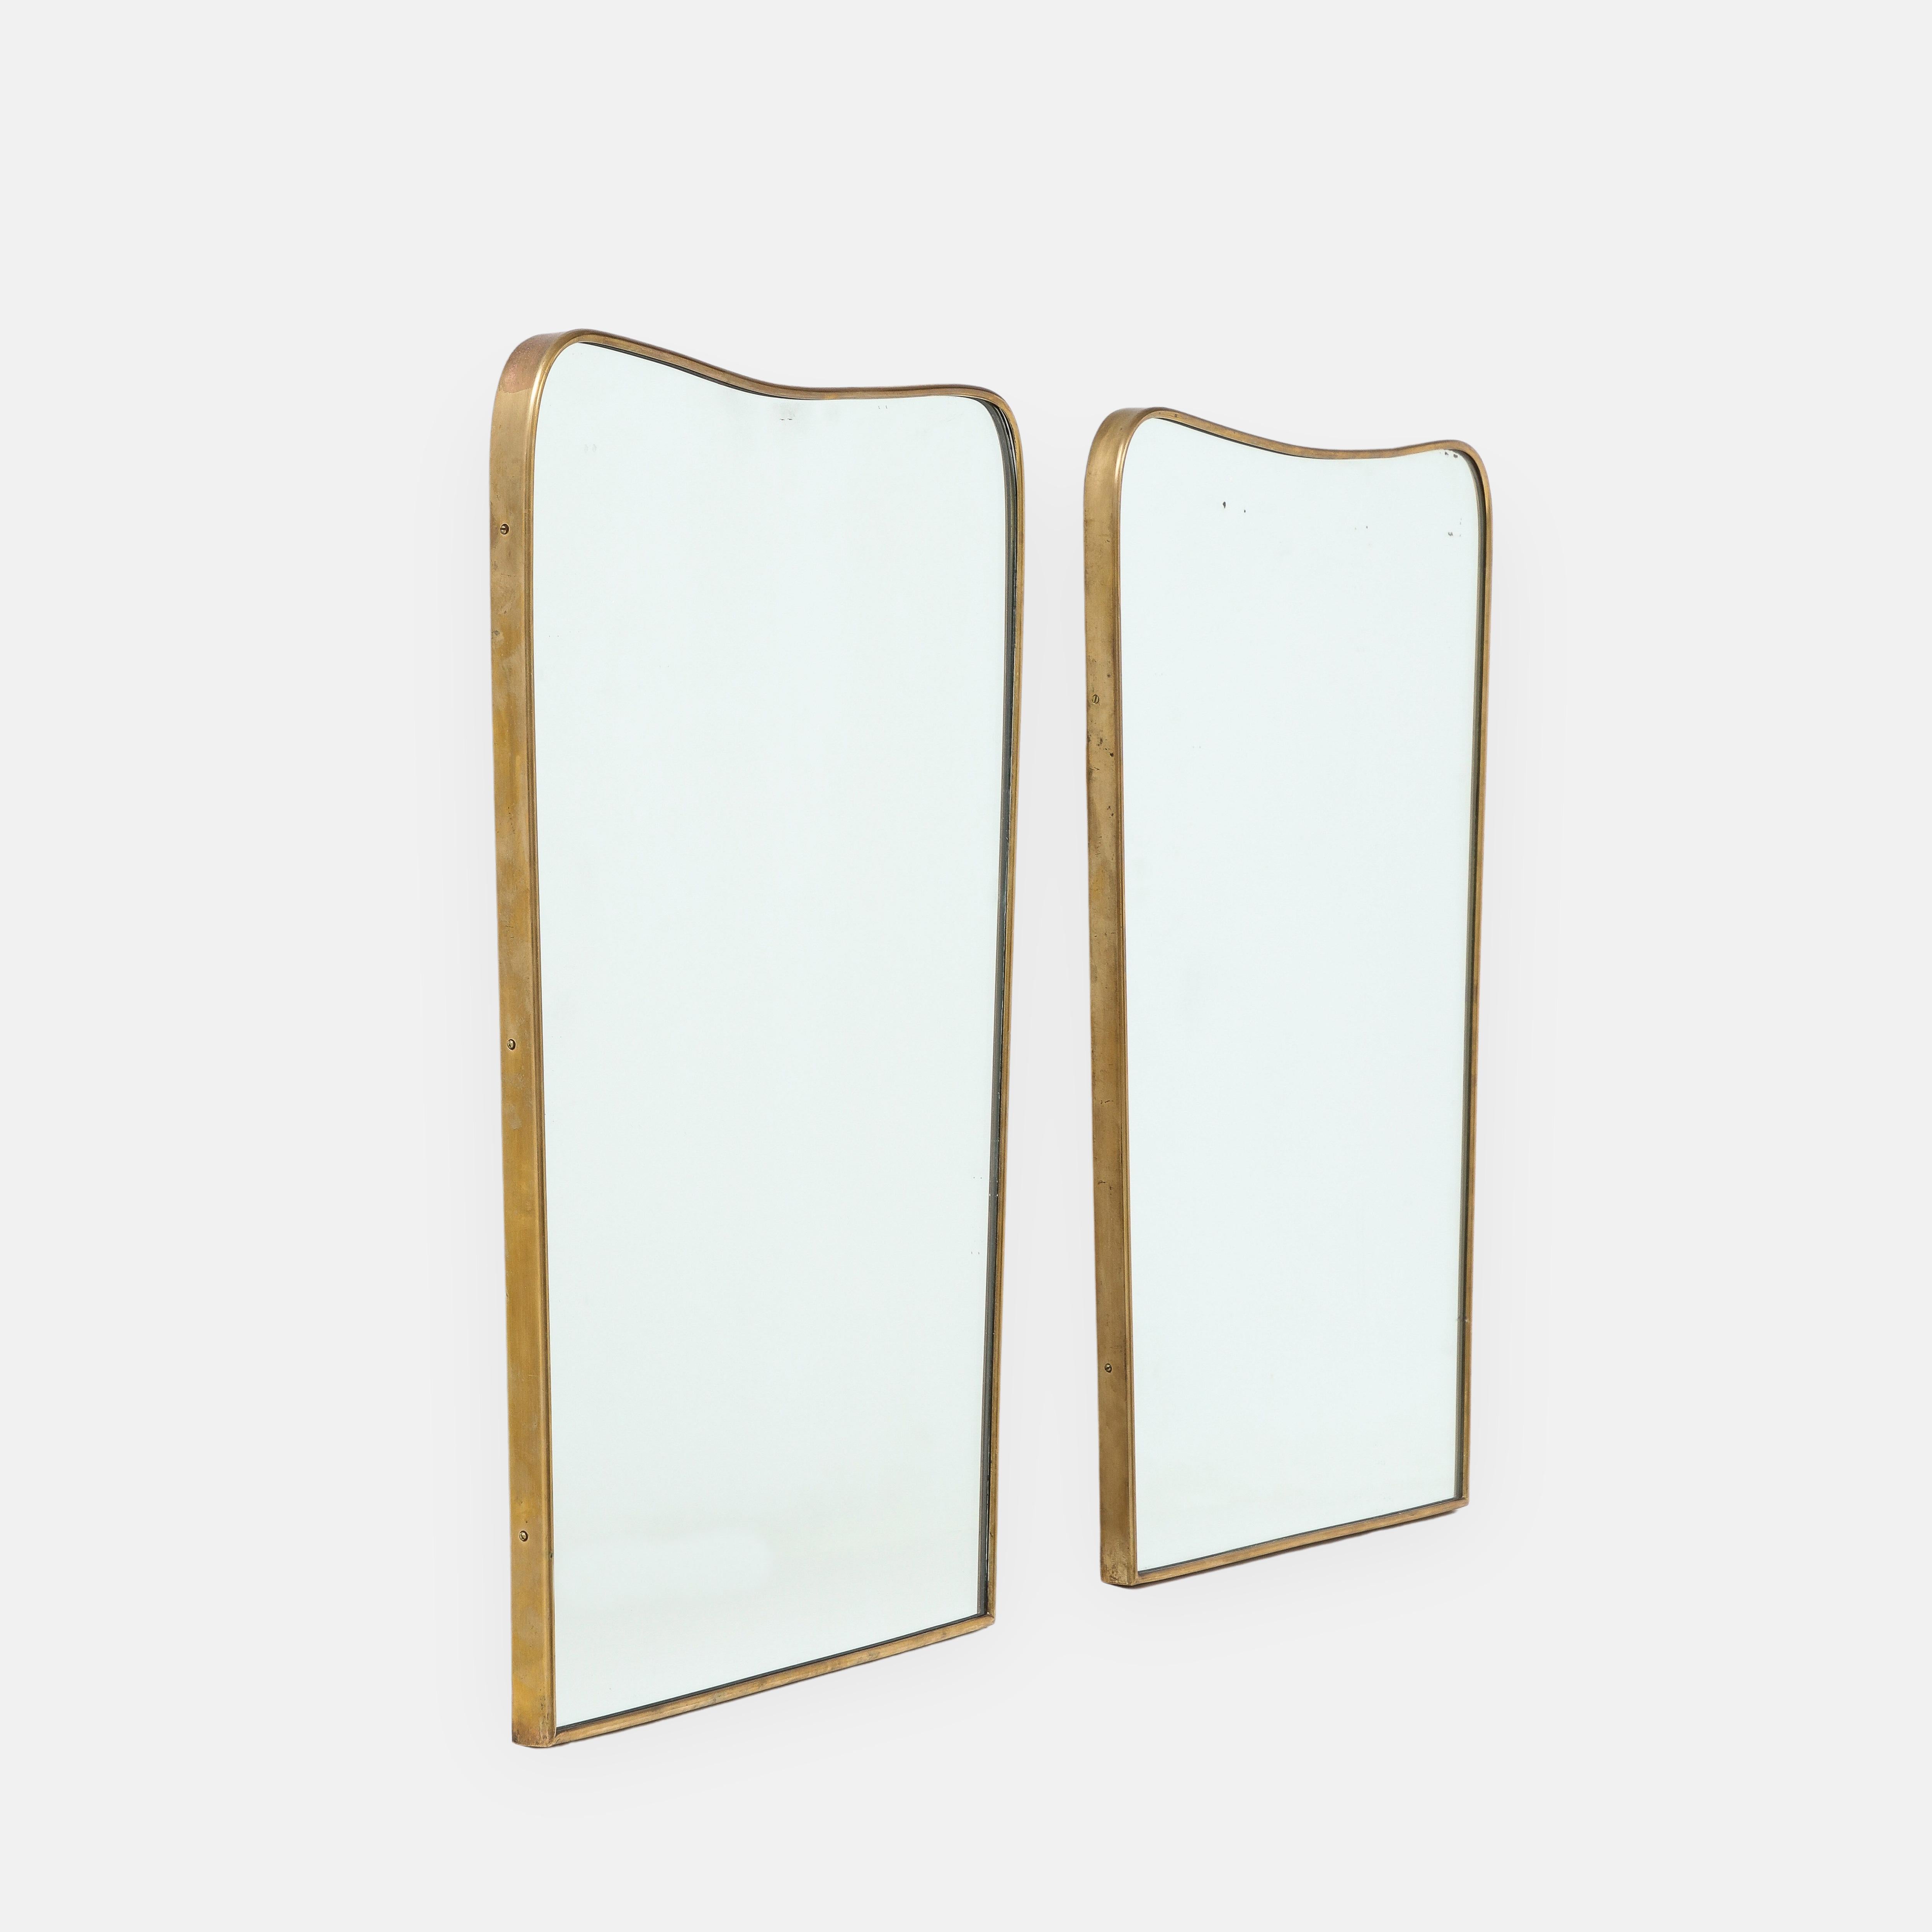 1950s Italian modernist pair of wall mirrors consisting of shaped brass frames with gently arched tops and rounded corners which taper towards the bottom with wood backings. Their original mirrored plates show some areas of foxing which illustrate